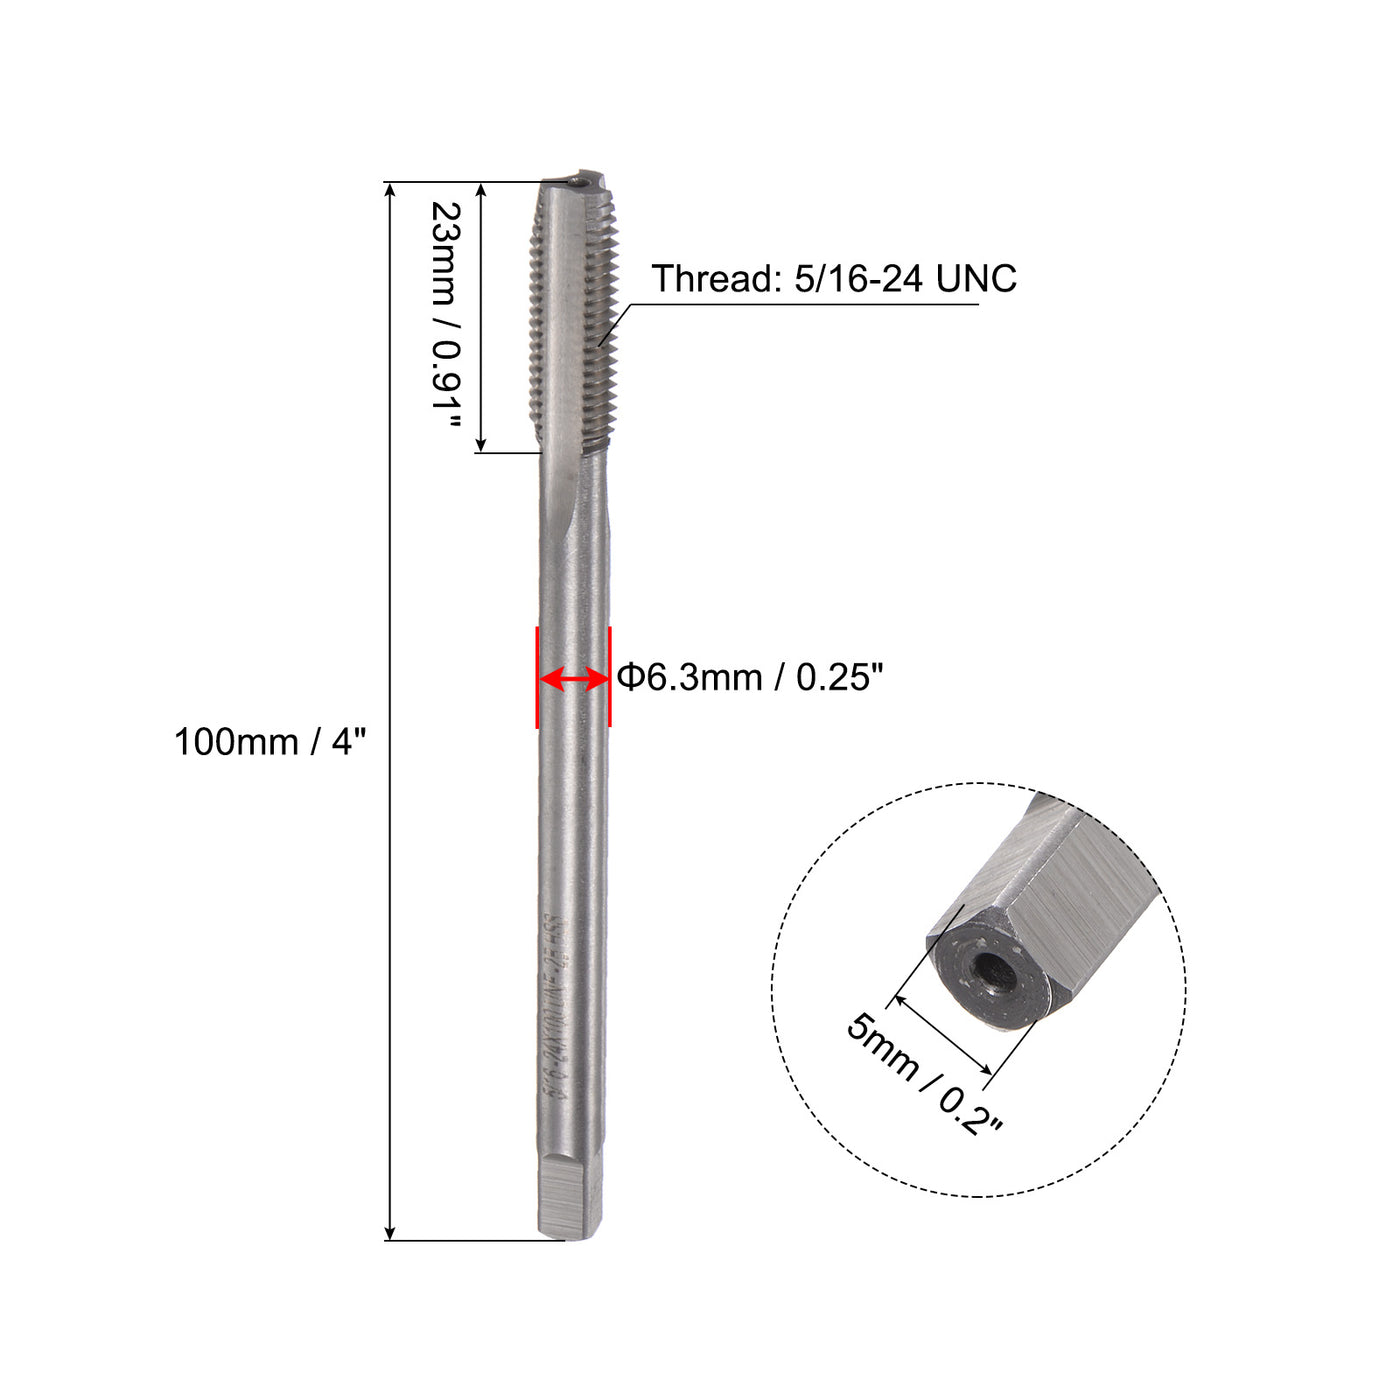 uxcell Uxcell 5/16-24 UNF High Speed Steel 4" Length 3 Straight Flute Machine Screw Thread Tap